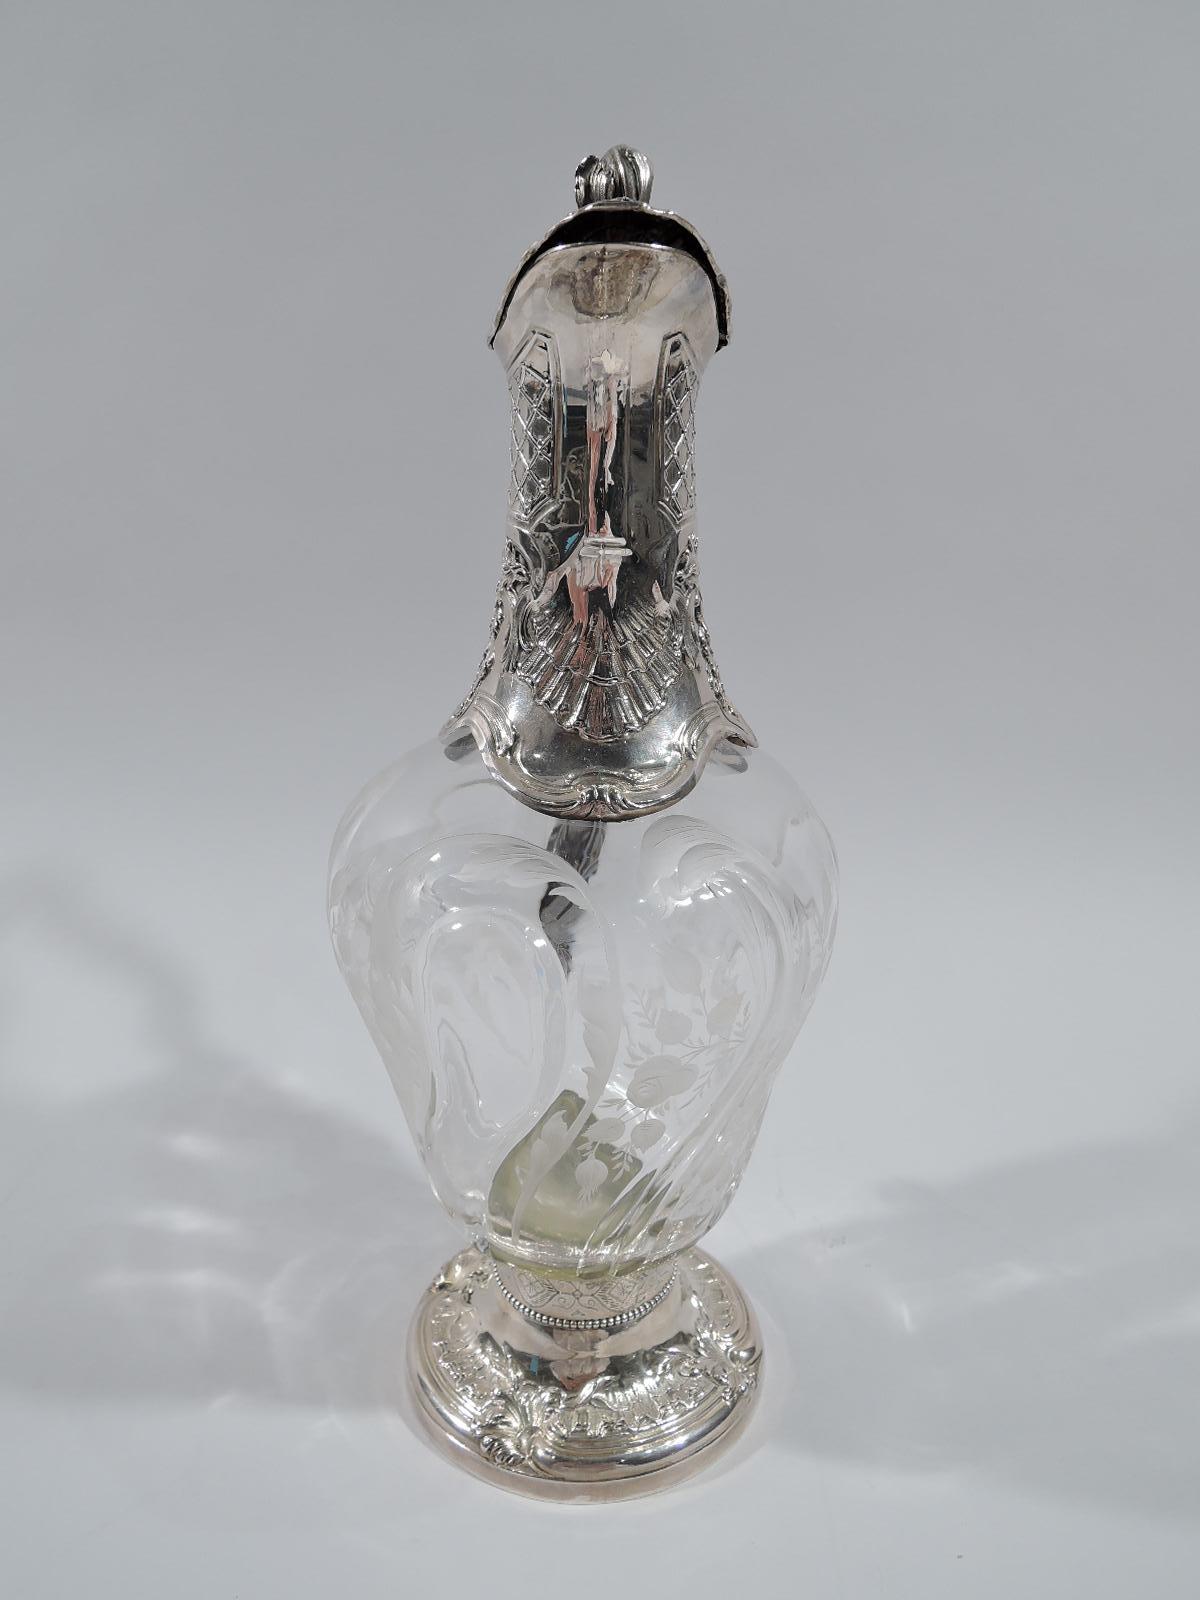 Beautiful turn-of-the-century Belle Époque Rococo silver and crystal decanter. Ovoid crystal body with alternating twisted flutes and lobes, and acid-etched blossoming flower branches. Neck has shaped base with leaves, shells, and flowers, as well